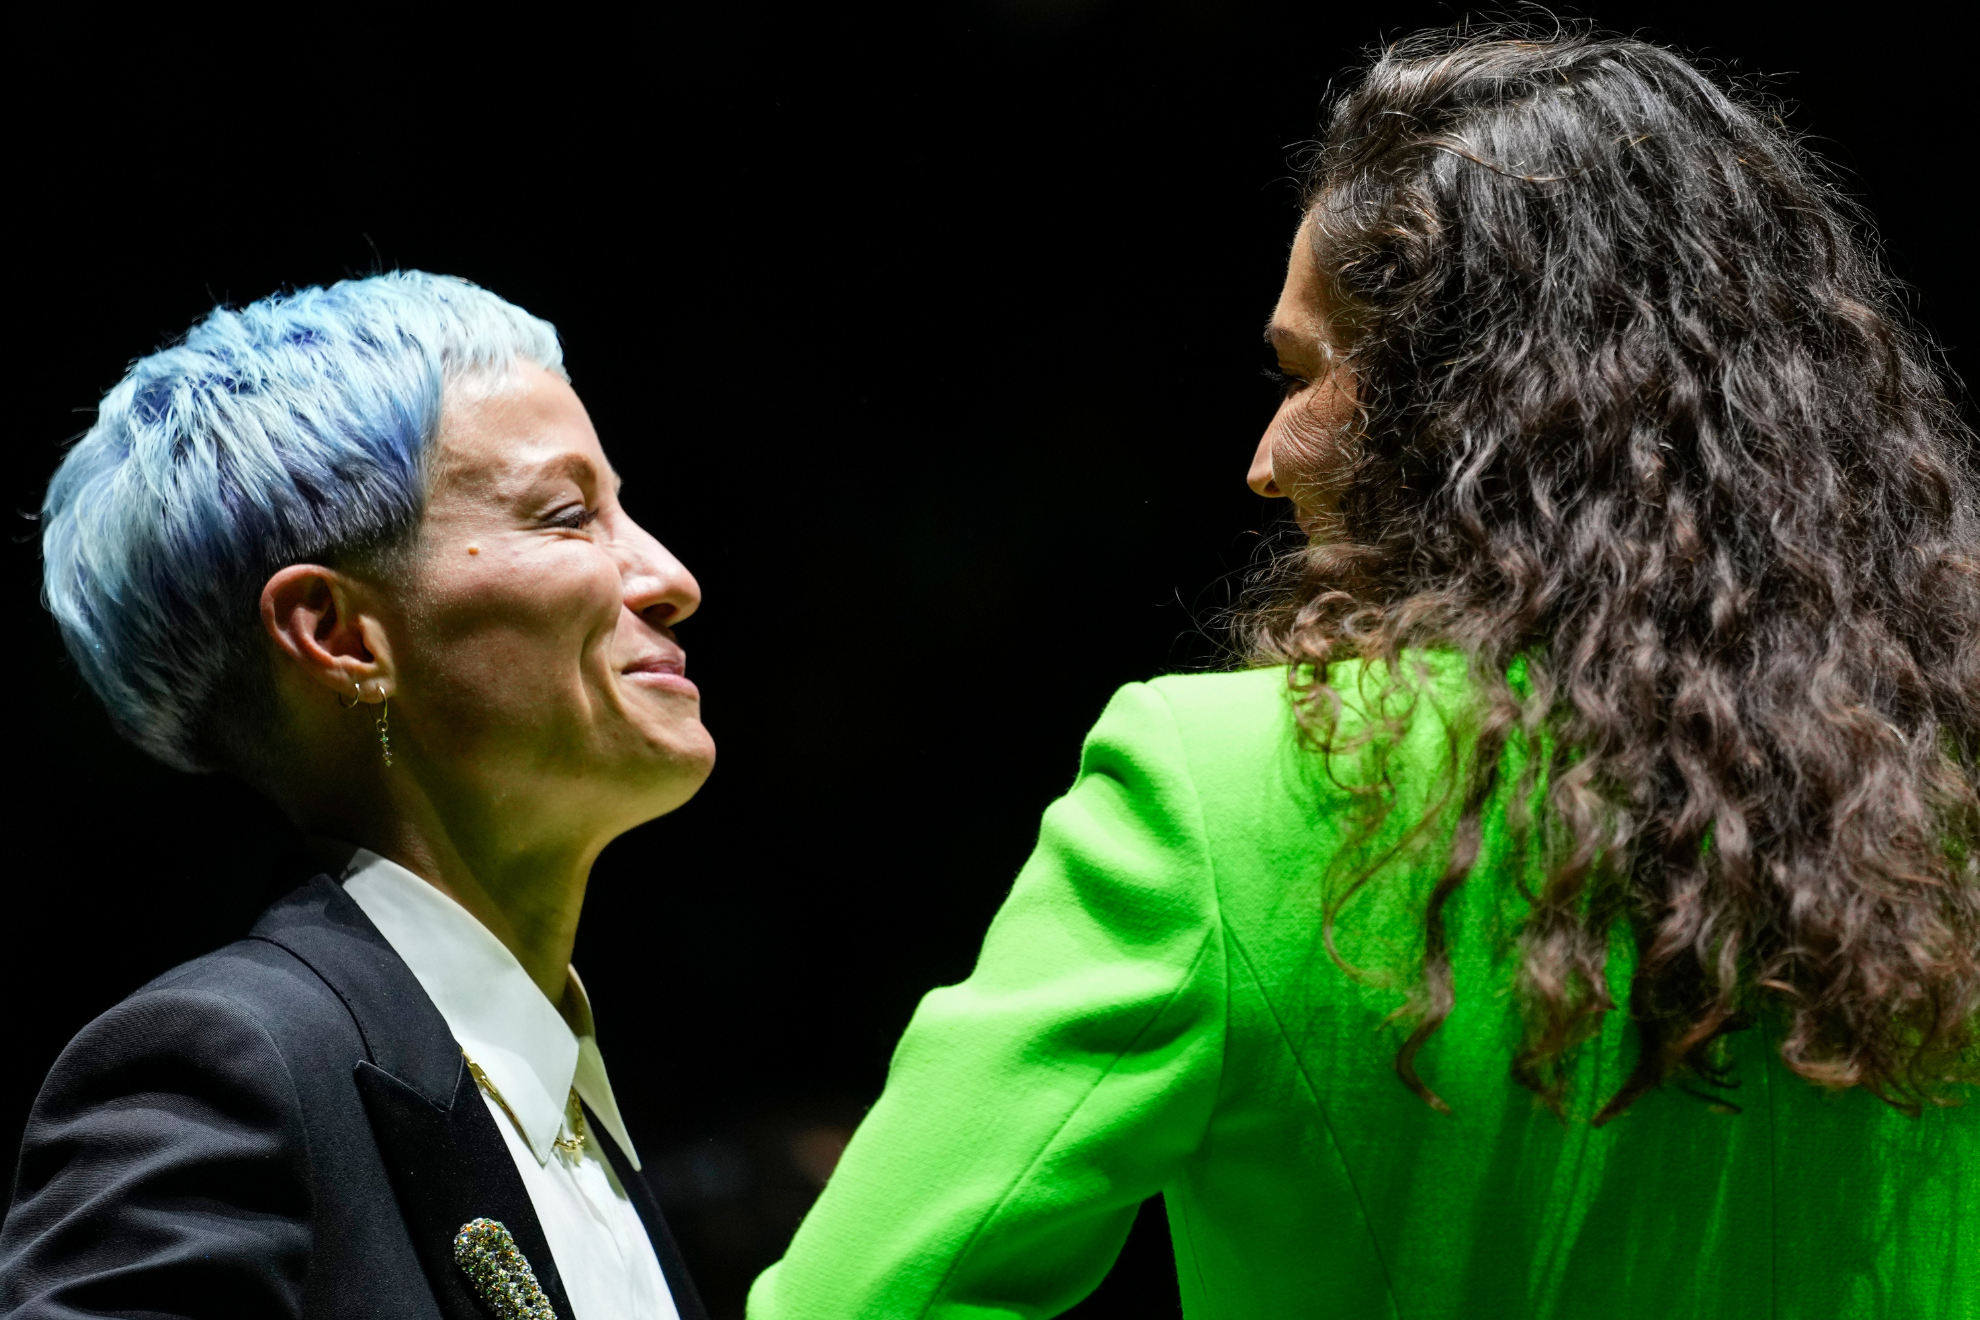 Rapinoe and Bird at Seattle's Climate Pledge Arena.